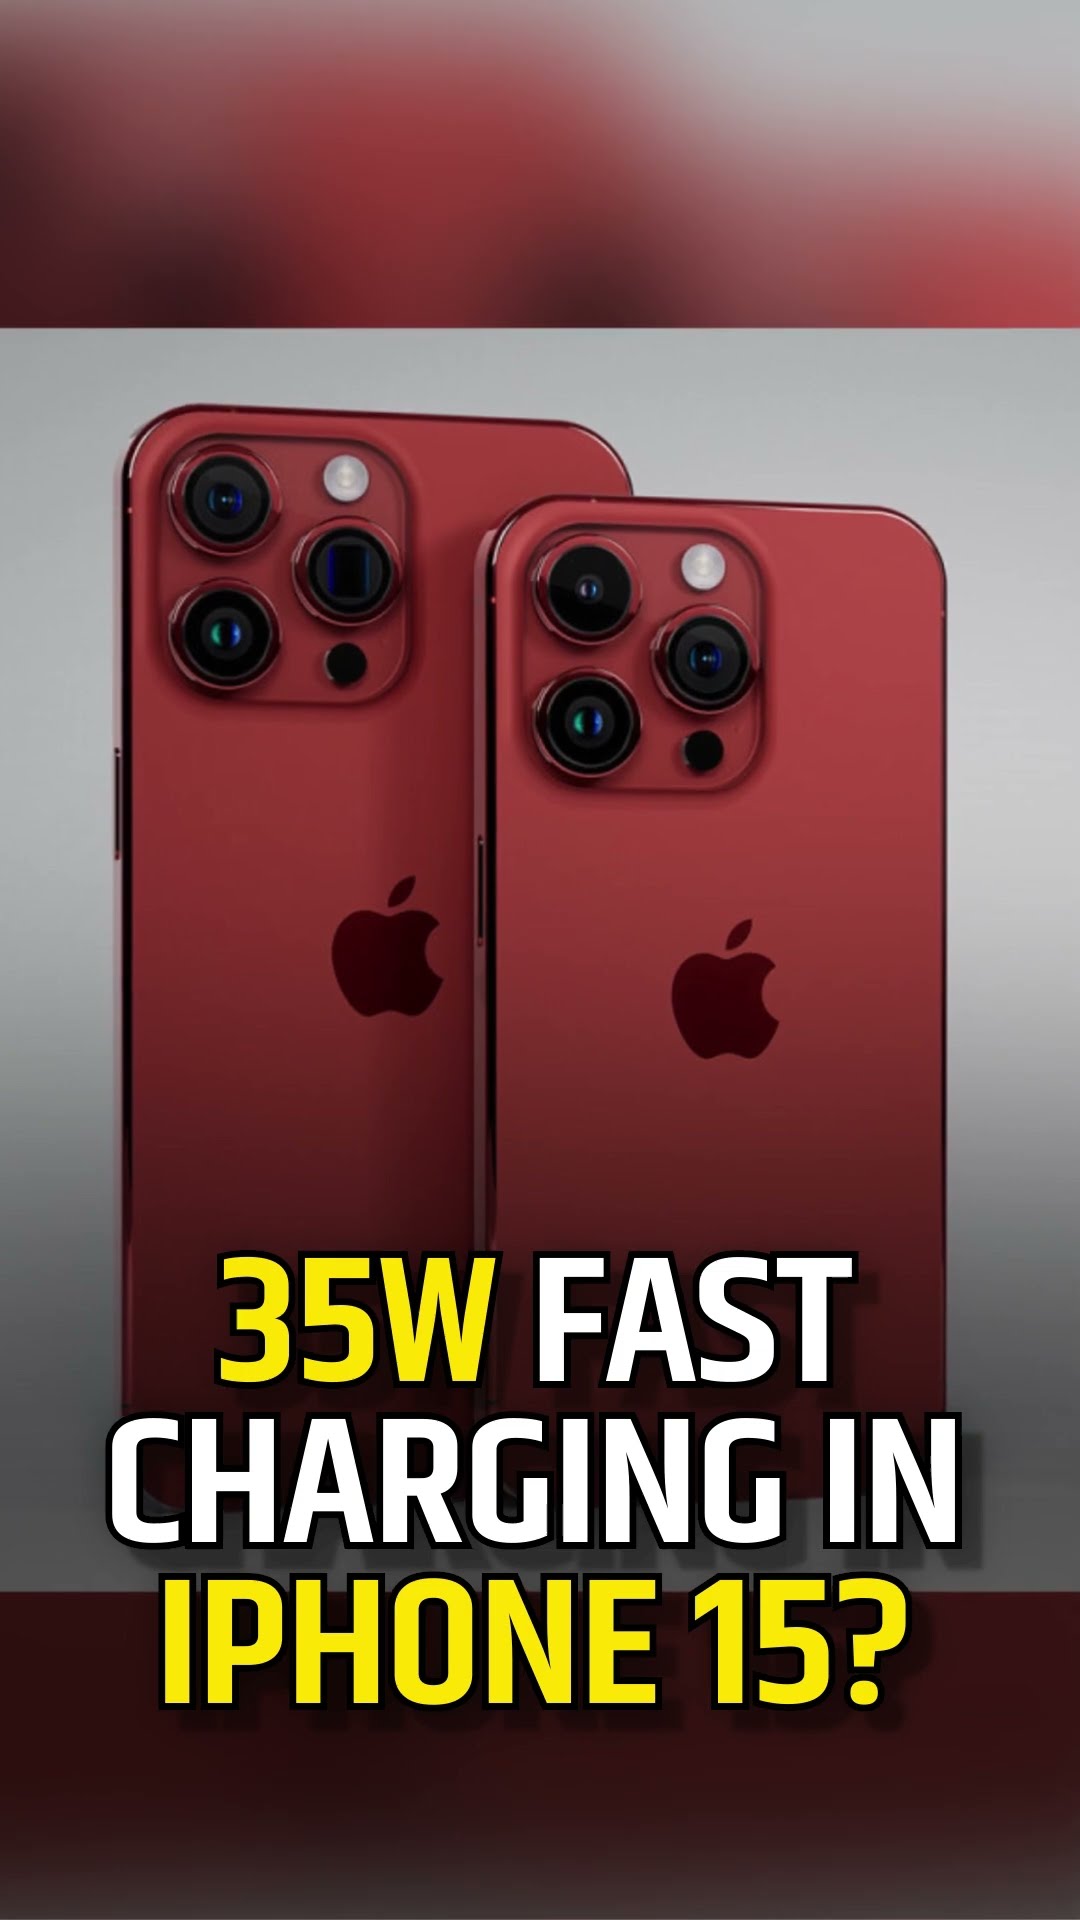 35W fast charging on iPhone 15? #shorts